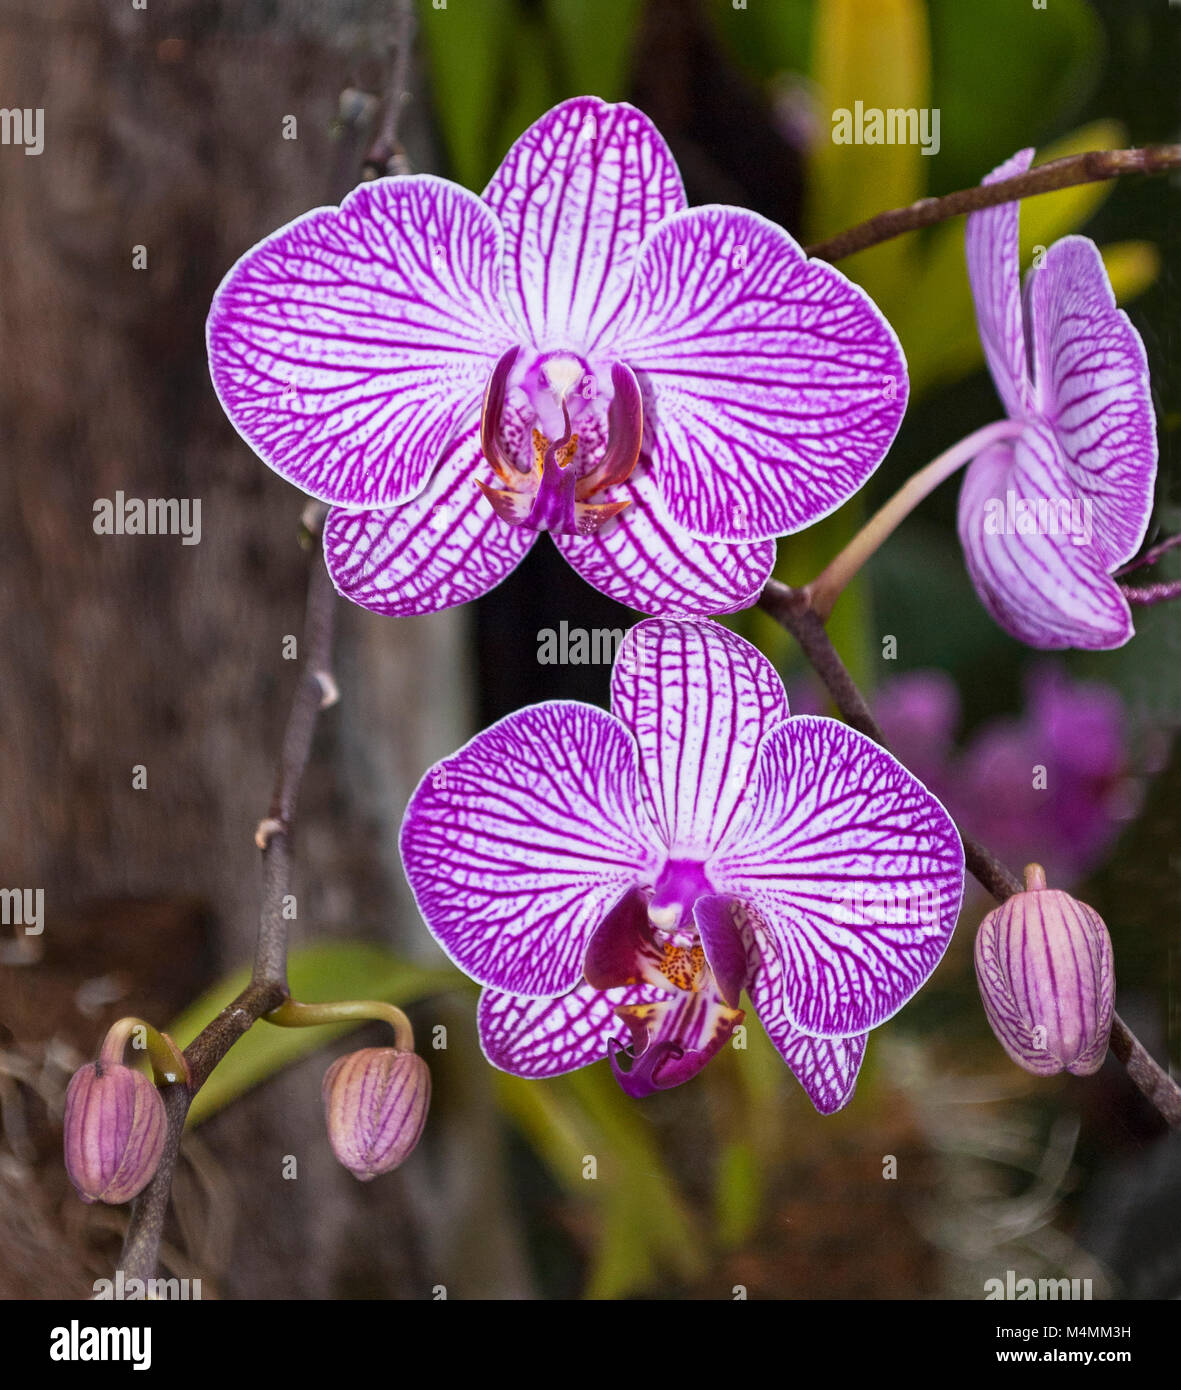 cluster of purple and white striped orchid flowers and buds in a tropical garden Stock Photo